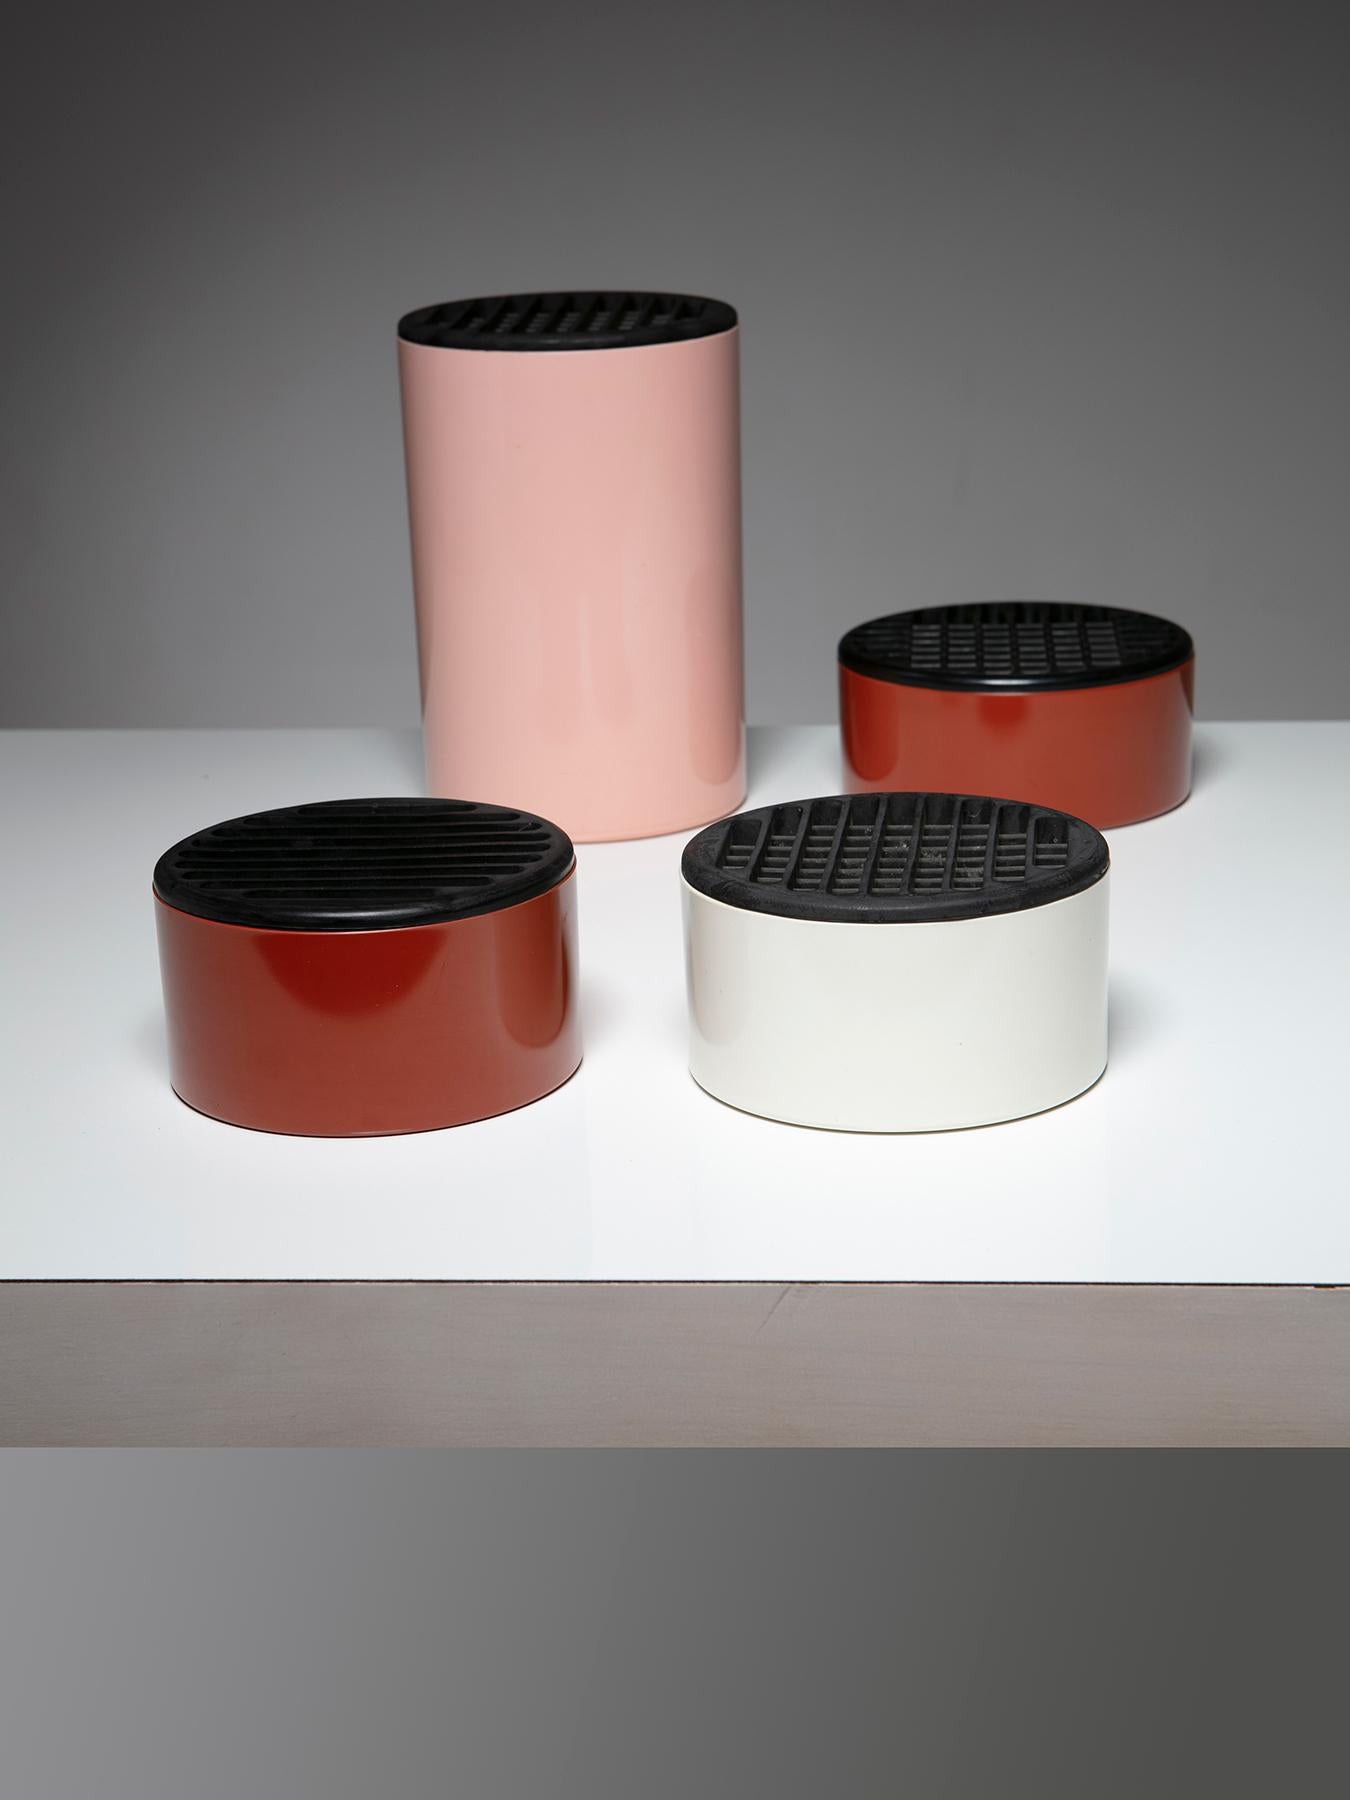 Set of four boxes by Gianfranco Frattini for Progetti.
Versatile elements composed by melamine base and rubber lids.